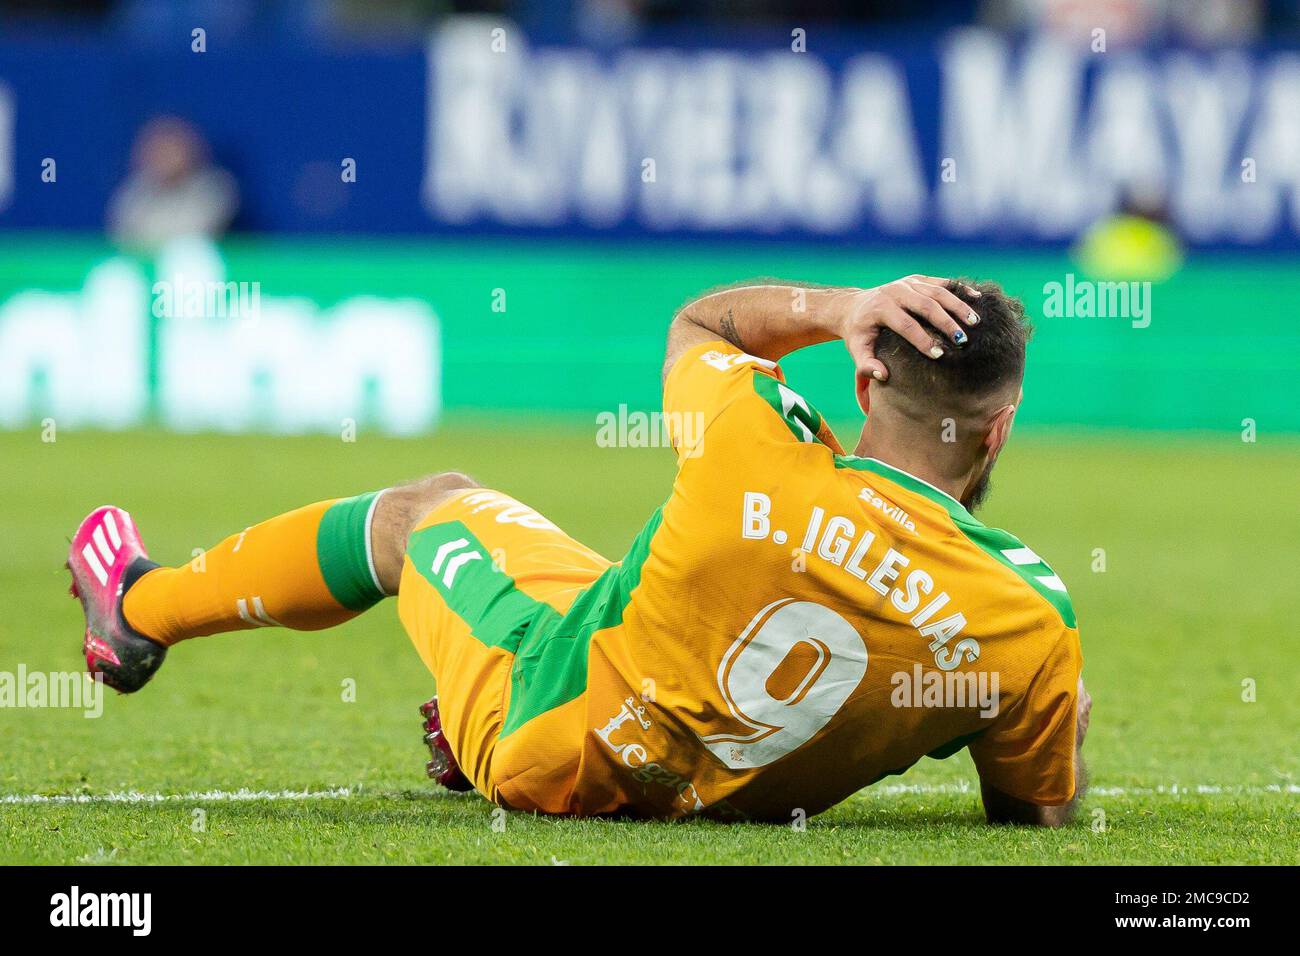 Borja Iglesias of Real Betis Balompie during the Liga match between RCD Espanyol and Real Betis at RCDE Stadium in Cornella, Spain. Stock Photo